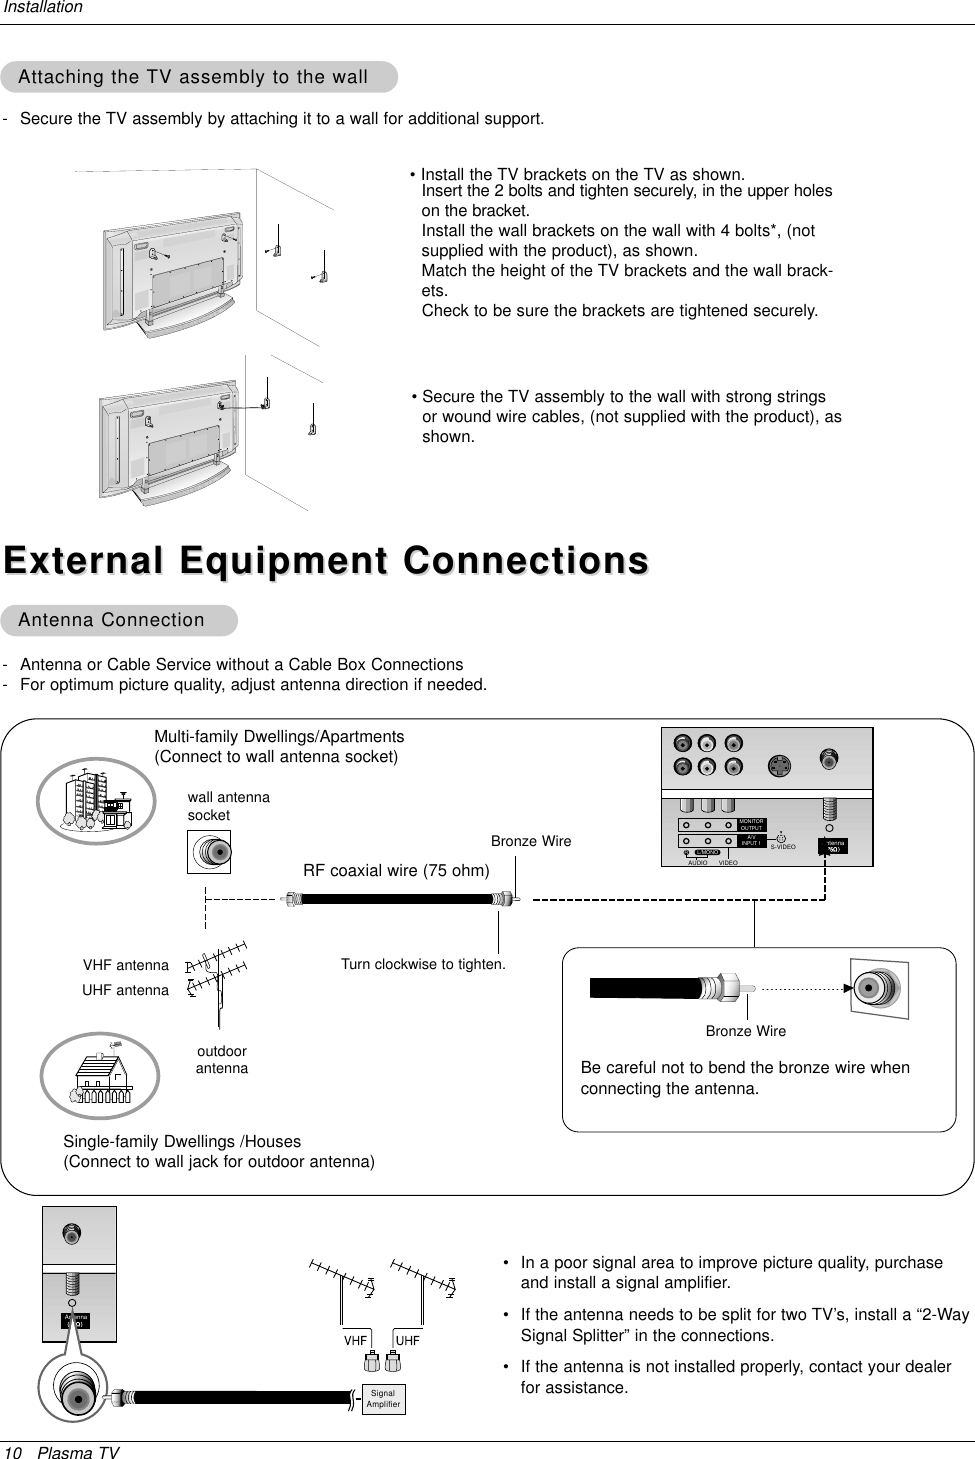 10 Plasma TVInstallation- Antenna or Cable Service without a Cable Box Connections- For optimum picture quality, adjust antenna direction if needed.External Equipment ConnectionsExternal Equipment ConnectionsAntenna ConnectionAntenna Connection•In a poor signal area to improve picture quality, purchaseand install a signal amplifier.•If the antenna needs to be split for two TV’s, install a “2-WaySignal Splitter” in the connections.•If the antenna is not installed properly, contact your dealerfor assistance.AntennaSignalAmplifierAntennaS-VIDEOMONITOROUTPUTA/VINPUT 1AUDIO VIDEORL/MONOMulti-family Dwellings/Apartments(Connect to wall antenna socket)Single-family Dwellings /Houses(Connect to wall jack for outdoor antenna)outdoorantennawall antennasocketVHF antennaUHF antennaRF coaxial wire (75 ohm)Bronze WireTurn clockwise to tighten.Bronze WireBe careful not to bend the bronze wire whenconnecting the antenna.- Secure the TV assembly by attaching it to a wall for additional support.Attaching the Attaching the TV assembly to the wallTV assembly to the wall• Install the TV brackets on the TV as shown.Insert the 2 bolts and tighten securely, in the upper holeson the bracket. Install the wall brackets on the wall with 4 bolts*, (notsupplied with the product), as shown.Match the height of the TV brackets and the wall brack-ets. Check to be sure the brackets are tightened securely.• Secure the TV assembly to the wall with strong stringsor wound wire cables, (not supplied with the product), asshown.